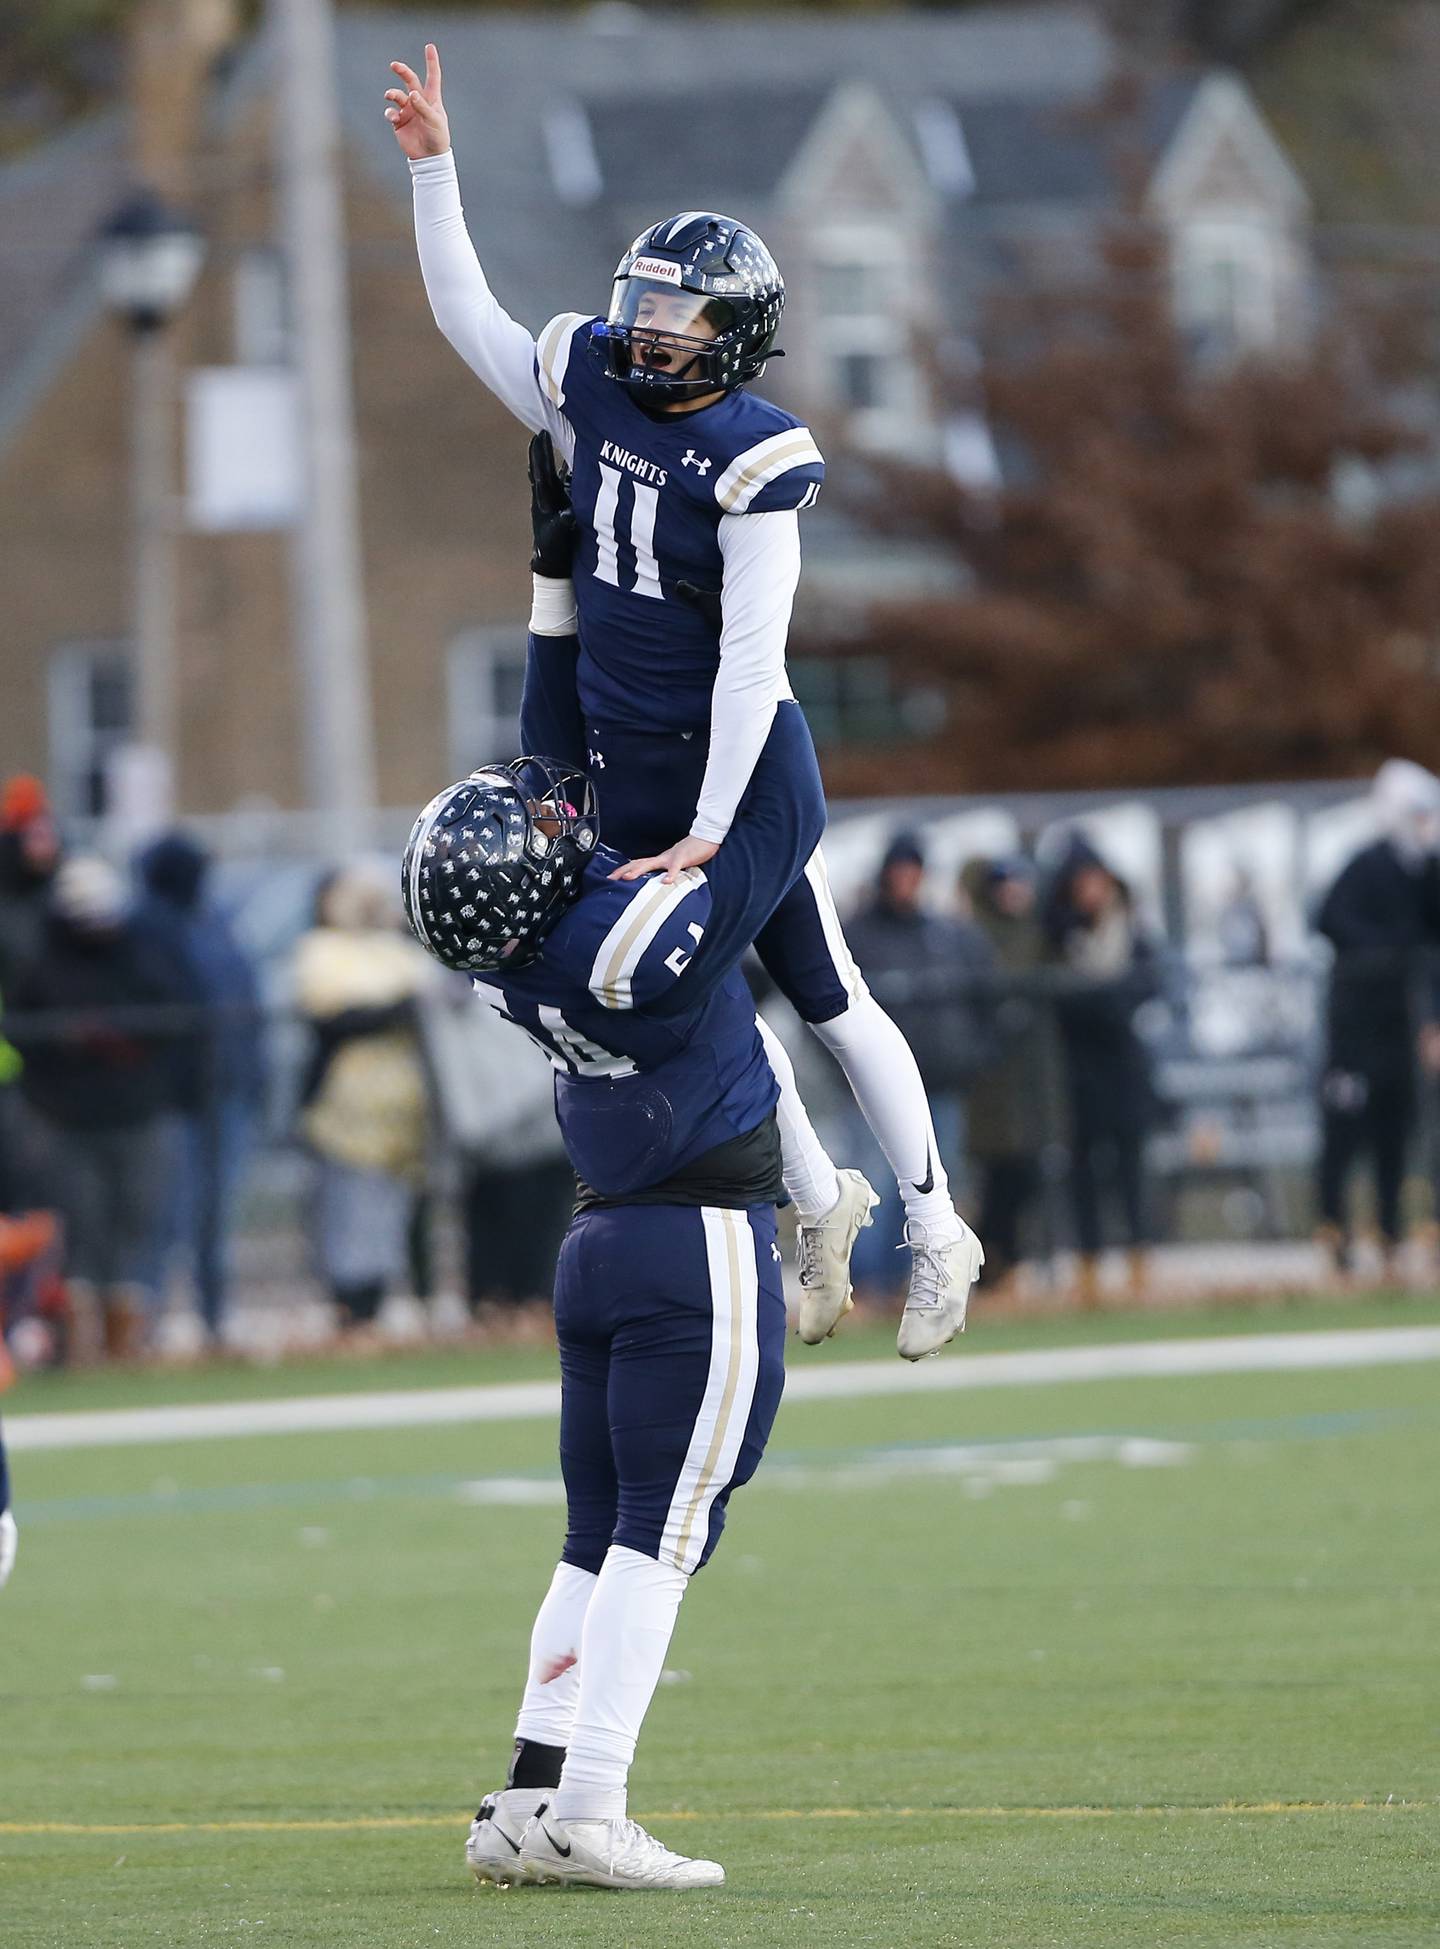 IC Catholic's Jayden Sutton (54) lifts Dennis Mandala (11) in celebration after a touchdown during the Class 3A varsity football semi-final playoff game between Byron High School and IC Catholic Prep on Saturday, Nov. 19, 2022 in Elmhurst, IL.